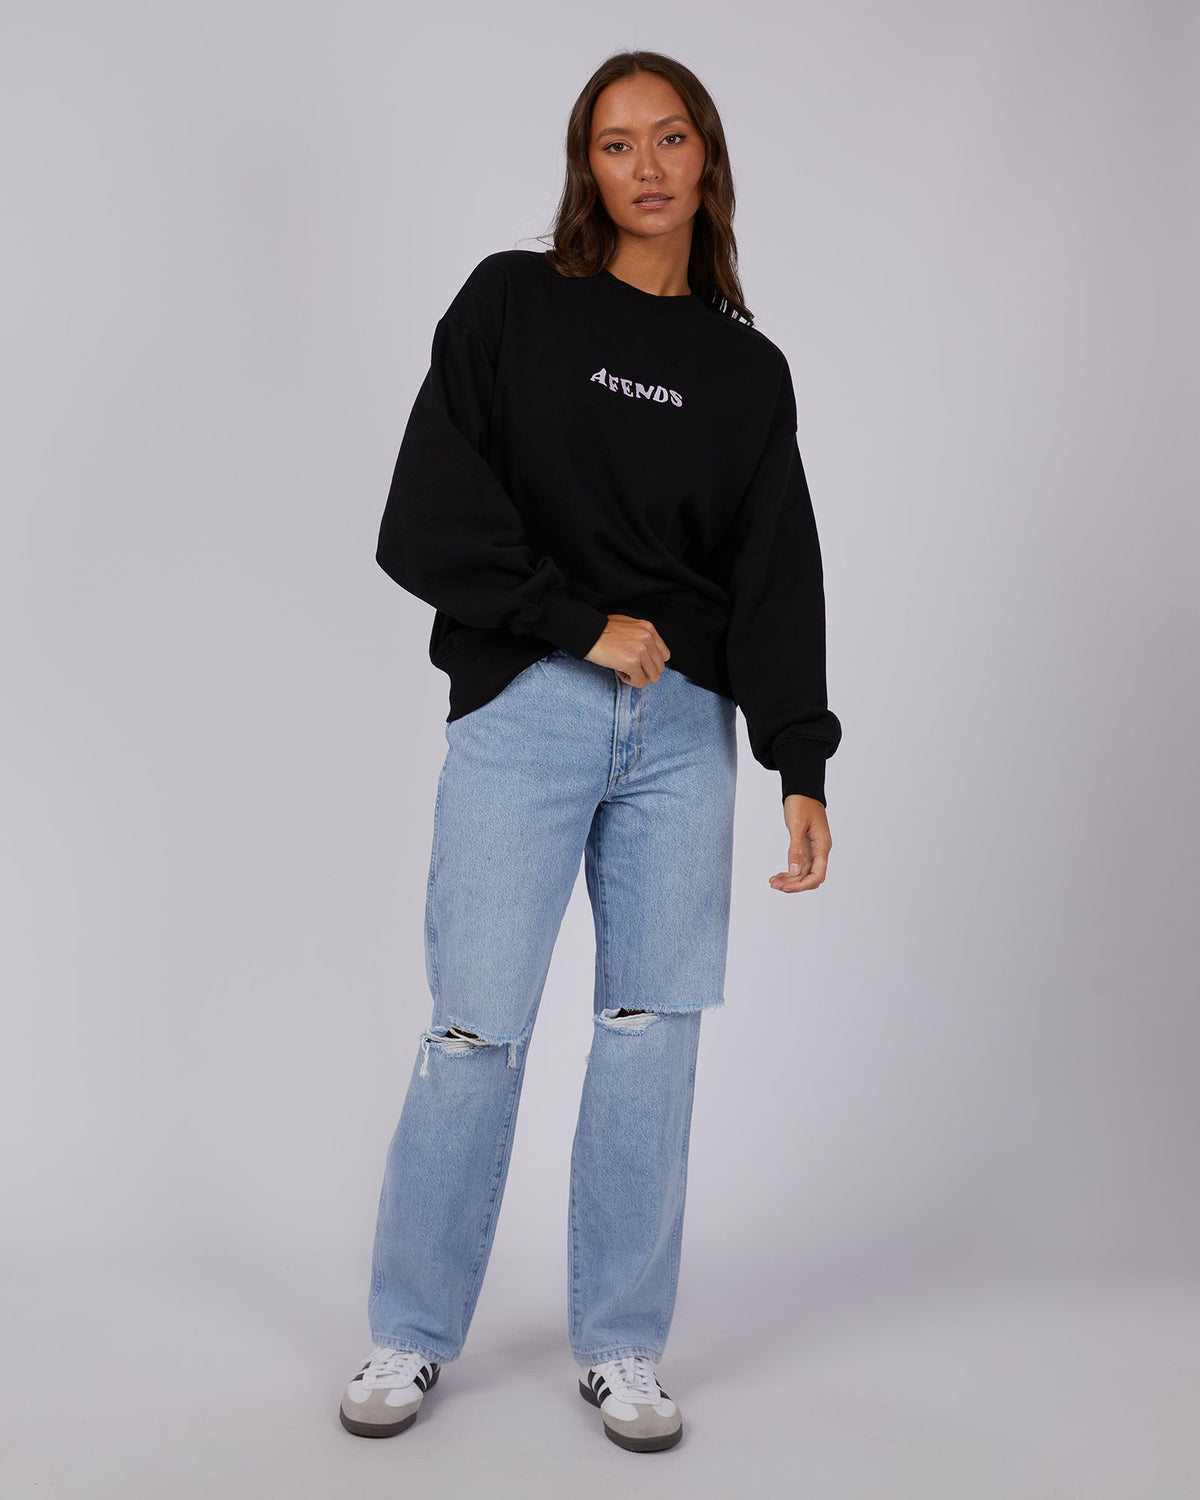 Afends-Lilah Recycled Crewneck Black-Edge Clothing